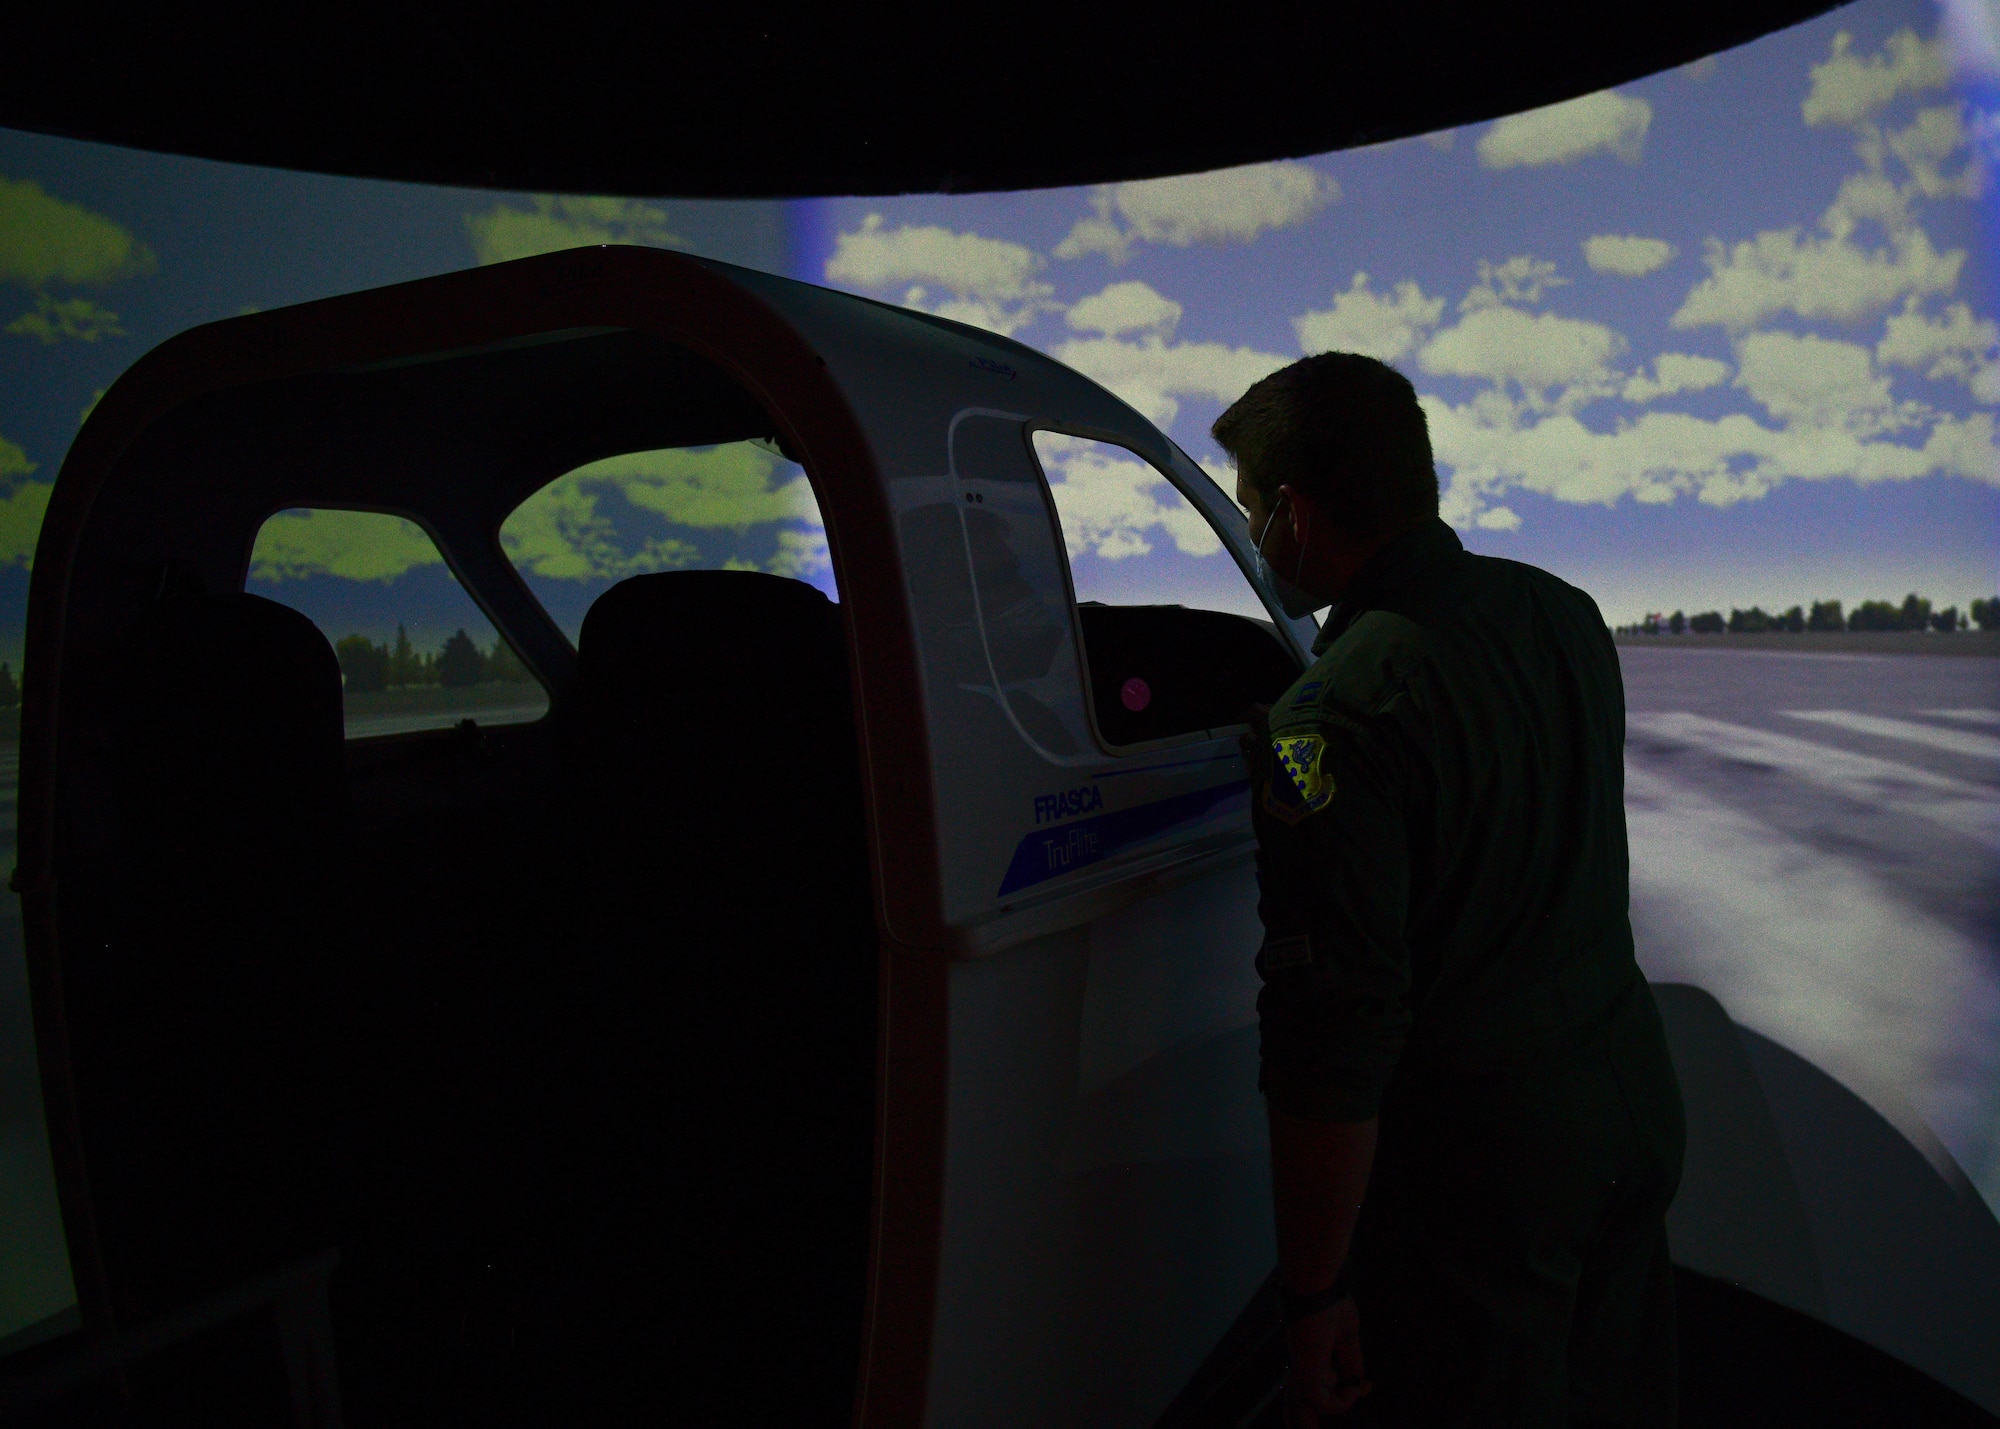 U.S. Air Force Capt. Guice Lyles, 555th Fighter Squadron F-16 Fighting Falcon pilot, looks at a flight simulator at the Nobile Aviation college in Udine, Italy, March 8, 2022. Lyles and an F-16 maintainer, and the Italian air force Air Traffic Control Tower (ATC) commander visited aeronautical high school students and shared their experiences from their jobs, highlighting challenges and accomplishments of each job. (U.S. Air Force photo by Senior Airman Brooke Moeder)